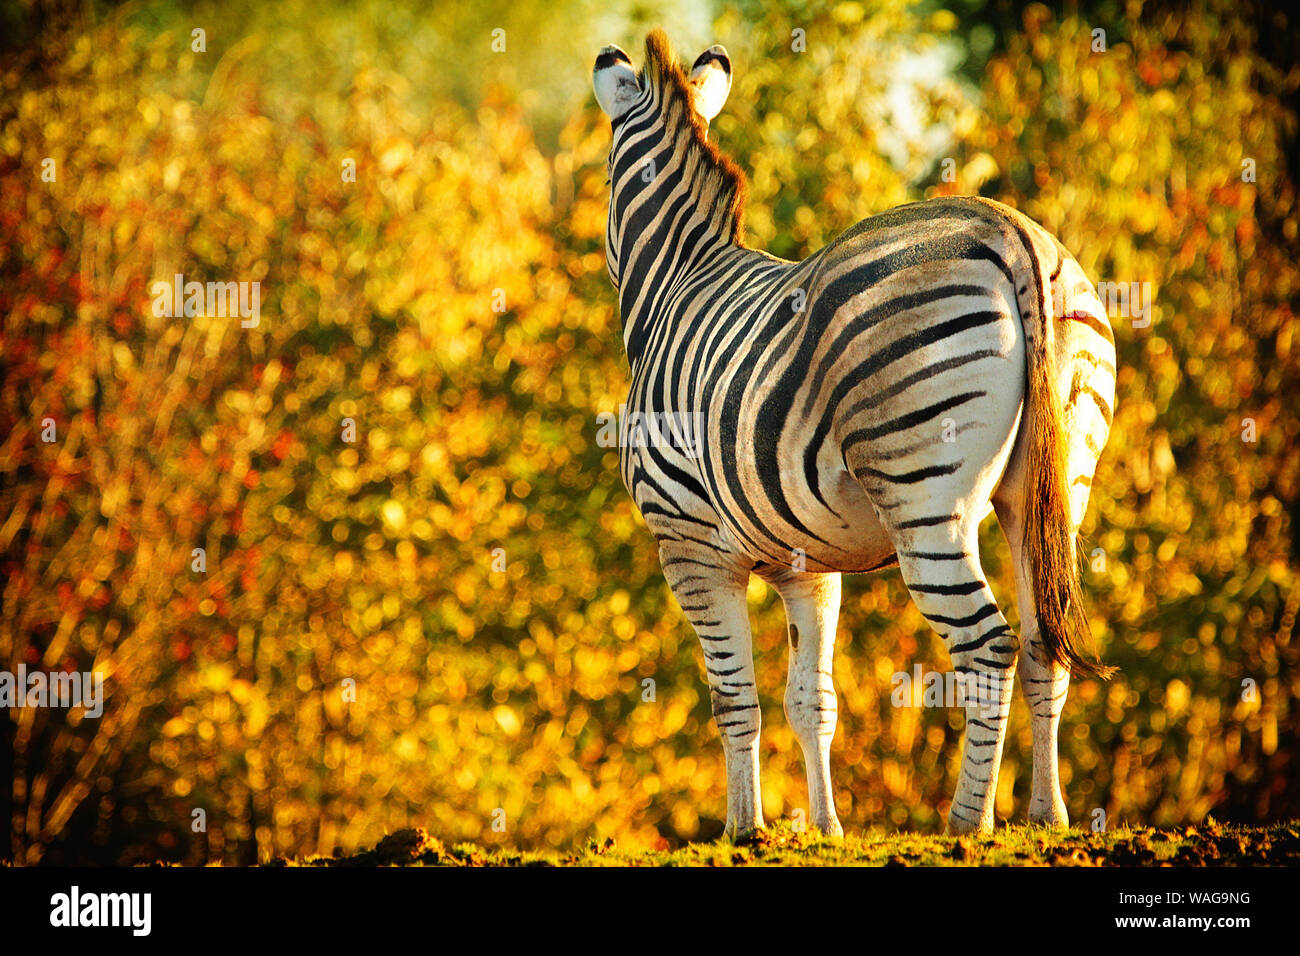 Zebras (Equus) truly beautiful.Patterns in nature are amazing & the black and white striped designs of zebras are just exquisite.Graphic & abstract. Stock Photo